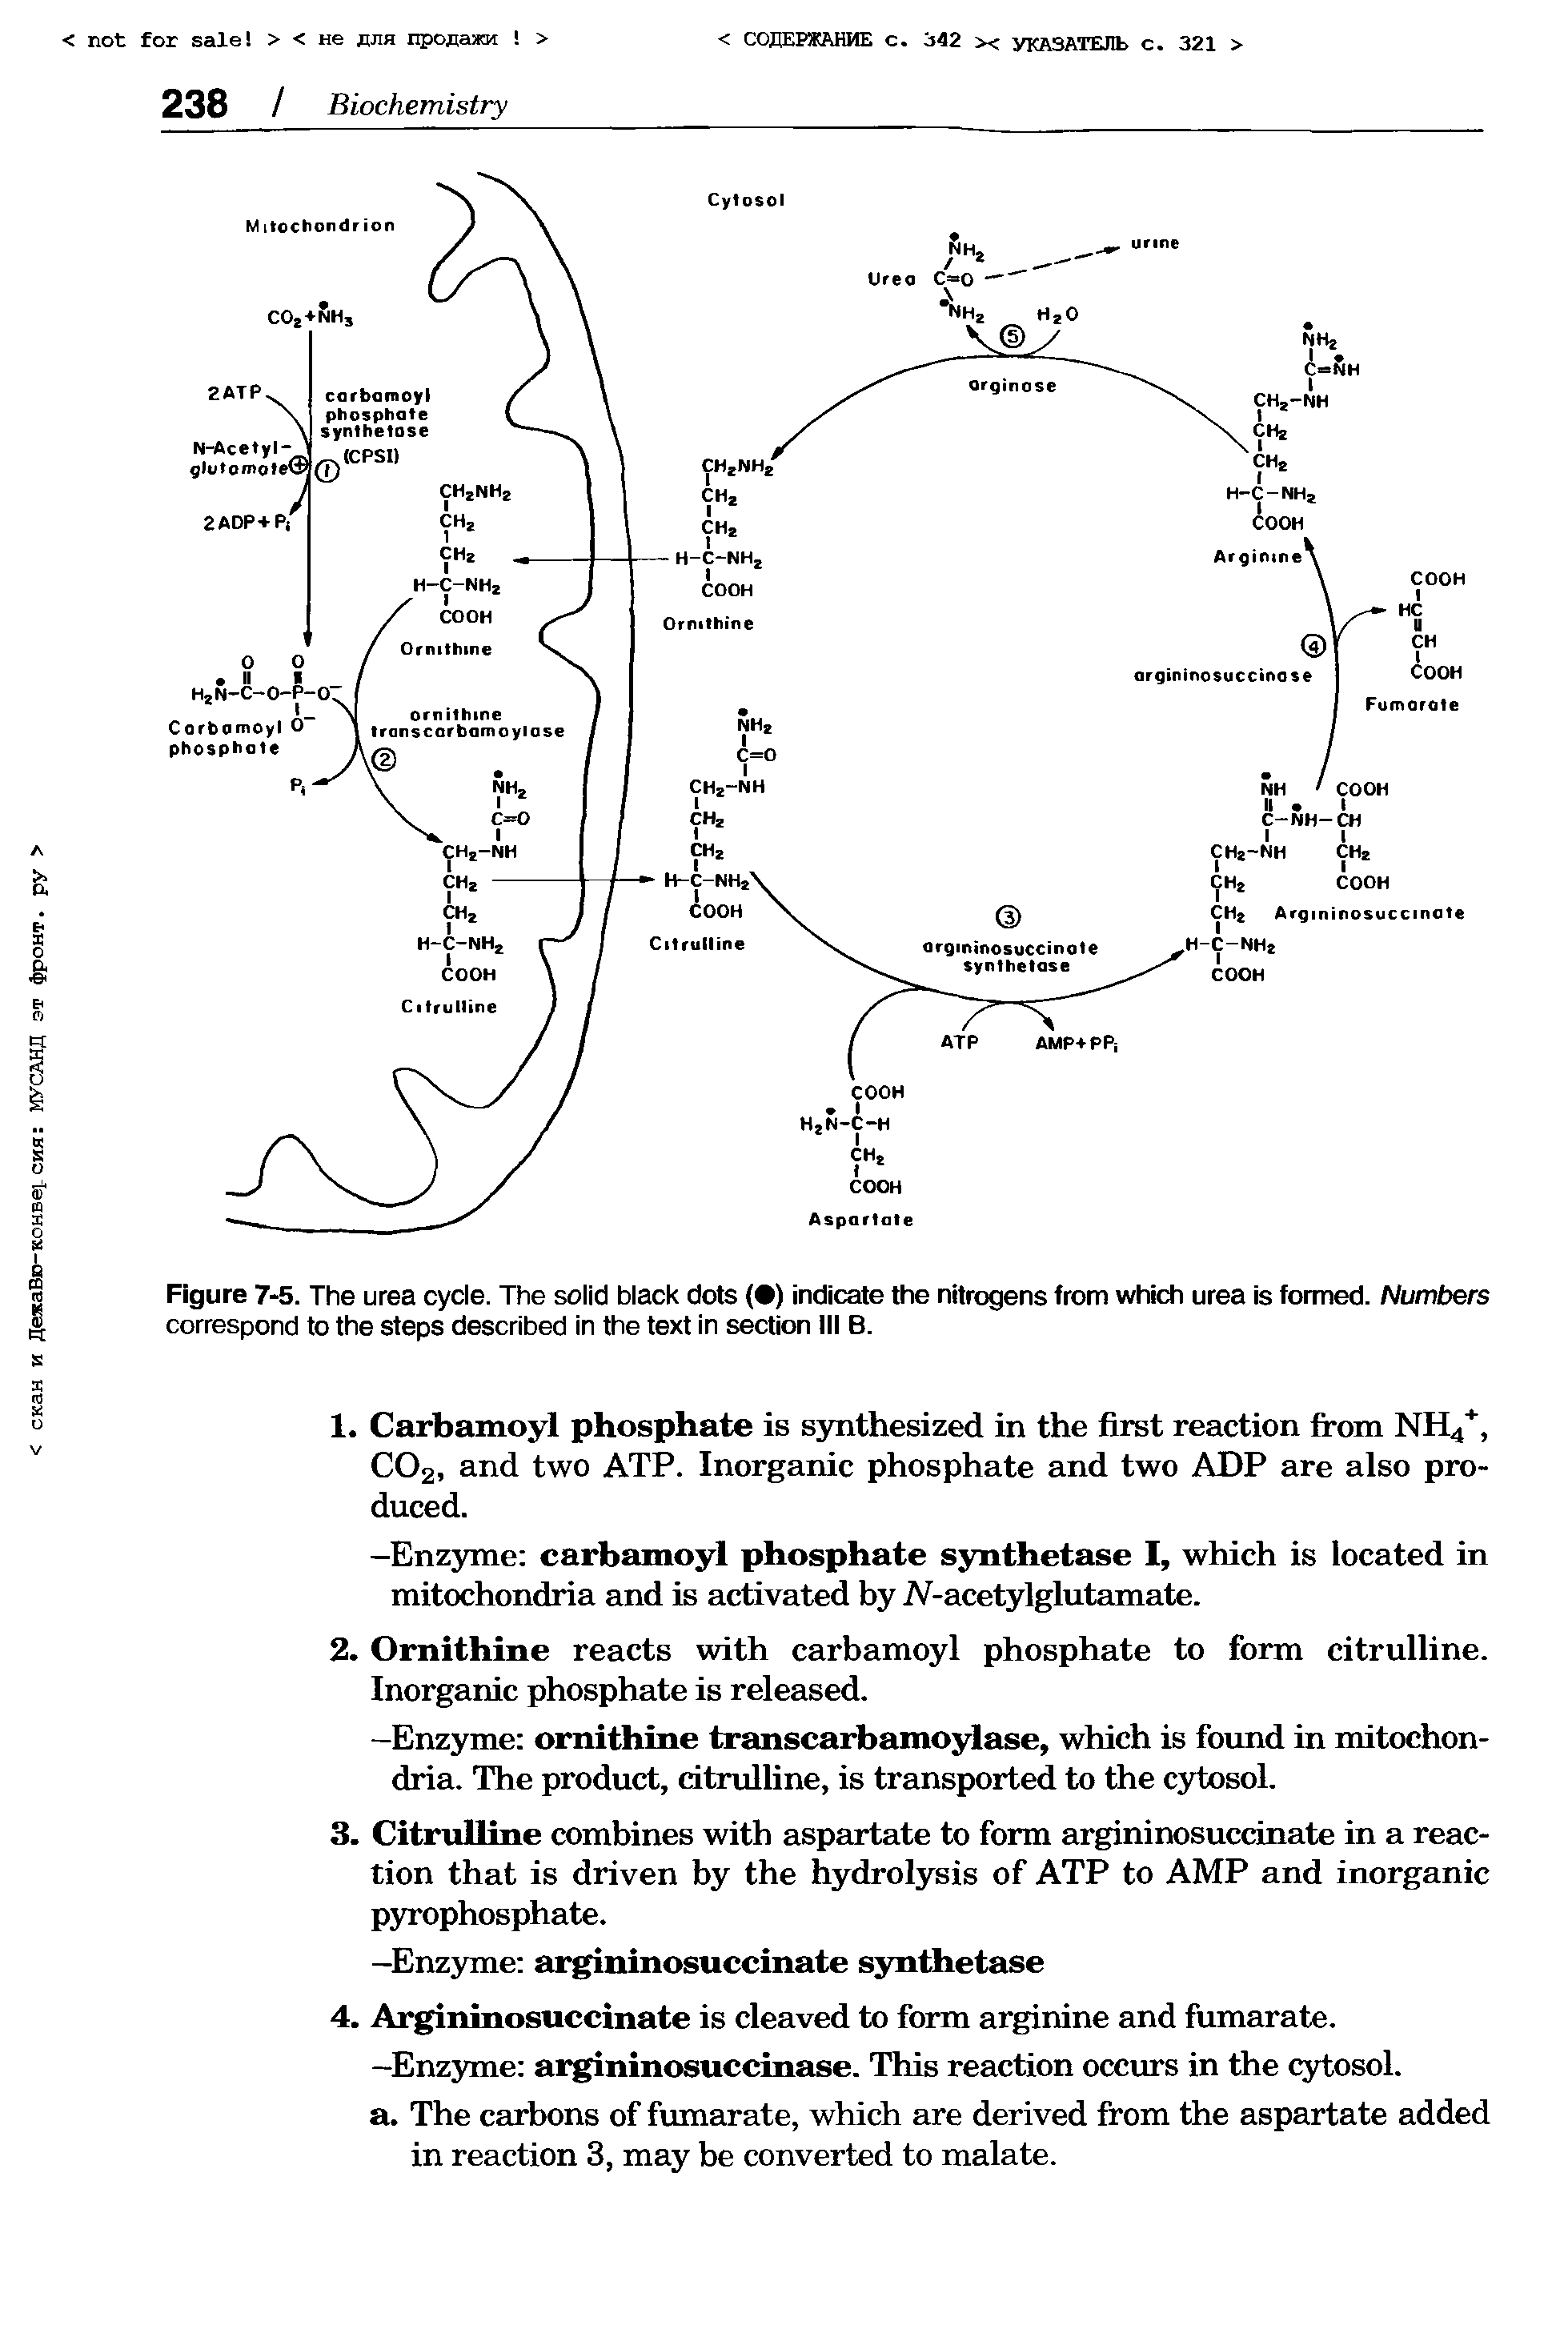 Figure 7-5. The urea cycle. The solid black dots ( ) indicate the nitrogens from which urea is formed. Numbers correspond to the steps described in the text in section III B. s...